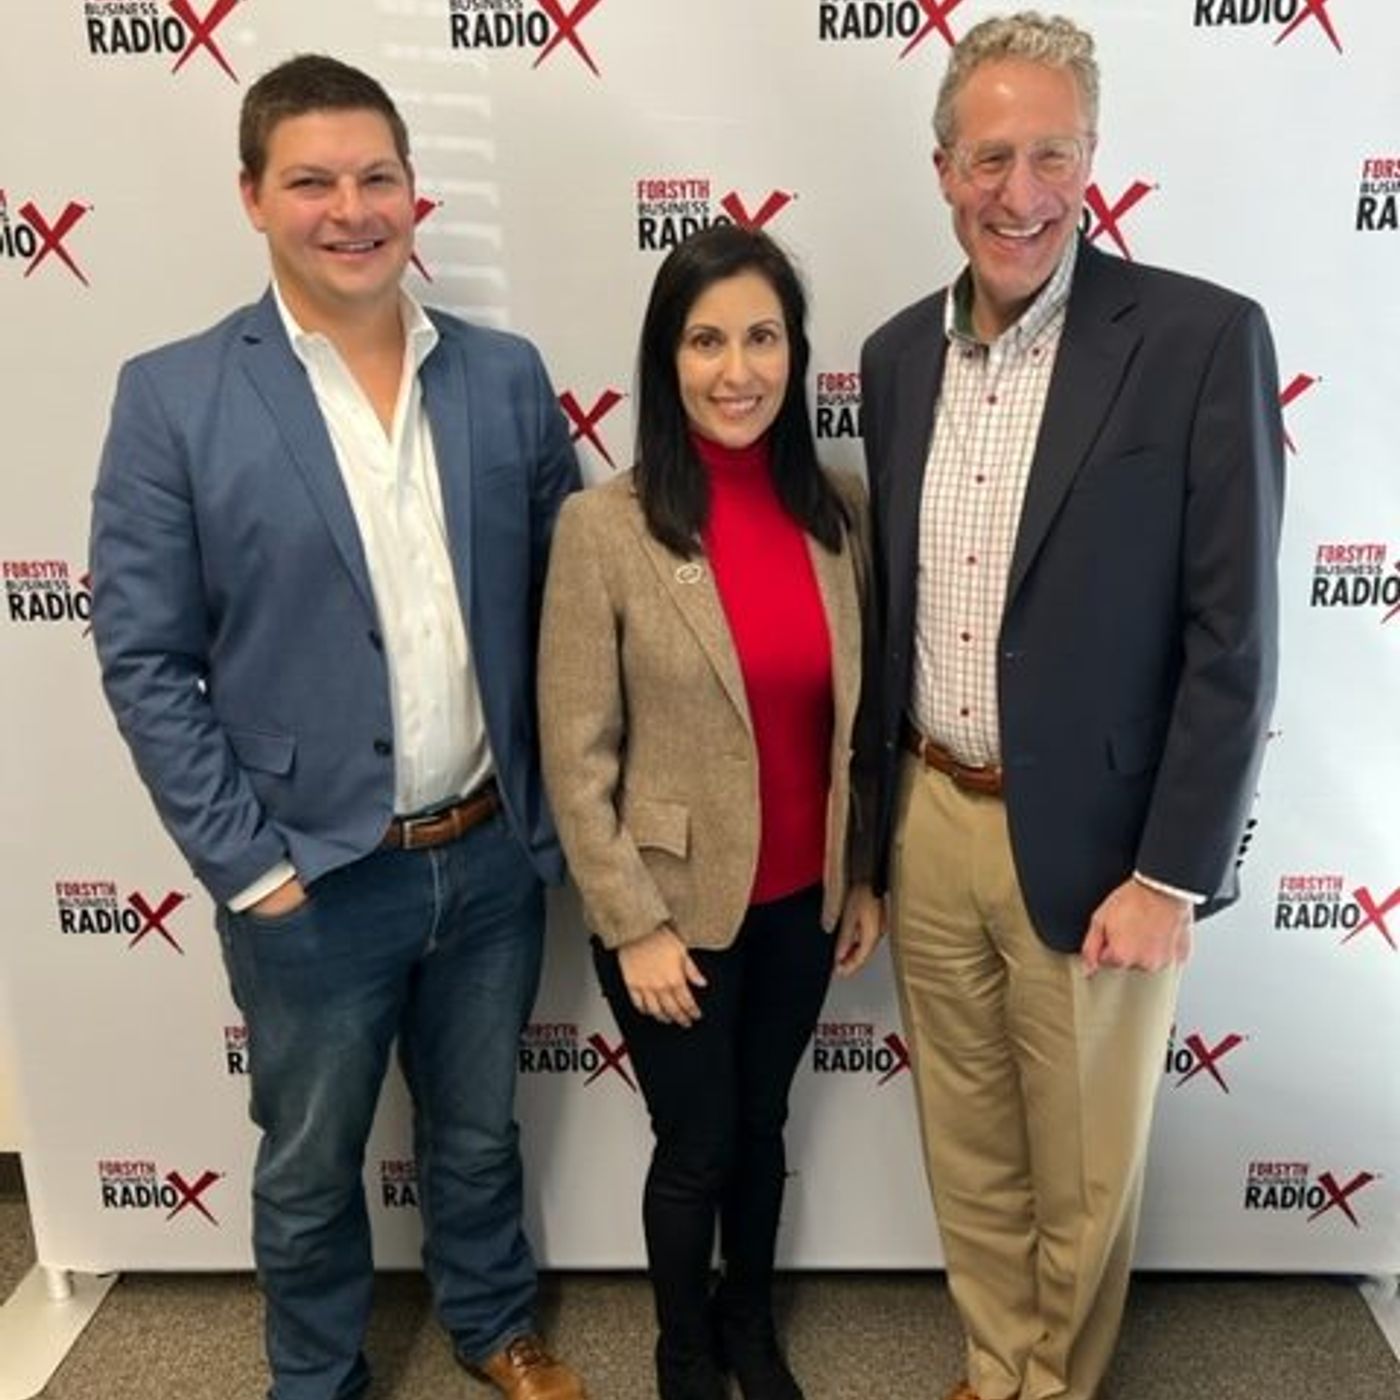 Simon Says Let's Talk Business 2.0: Pamela DeRitis of Connect and Captivate & Dan Mitrovich of Integrated Insurance Solutions Join Gary Zerm